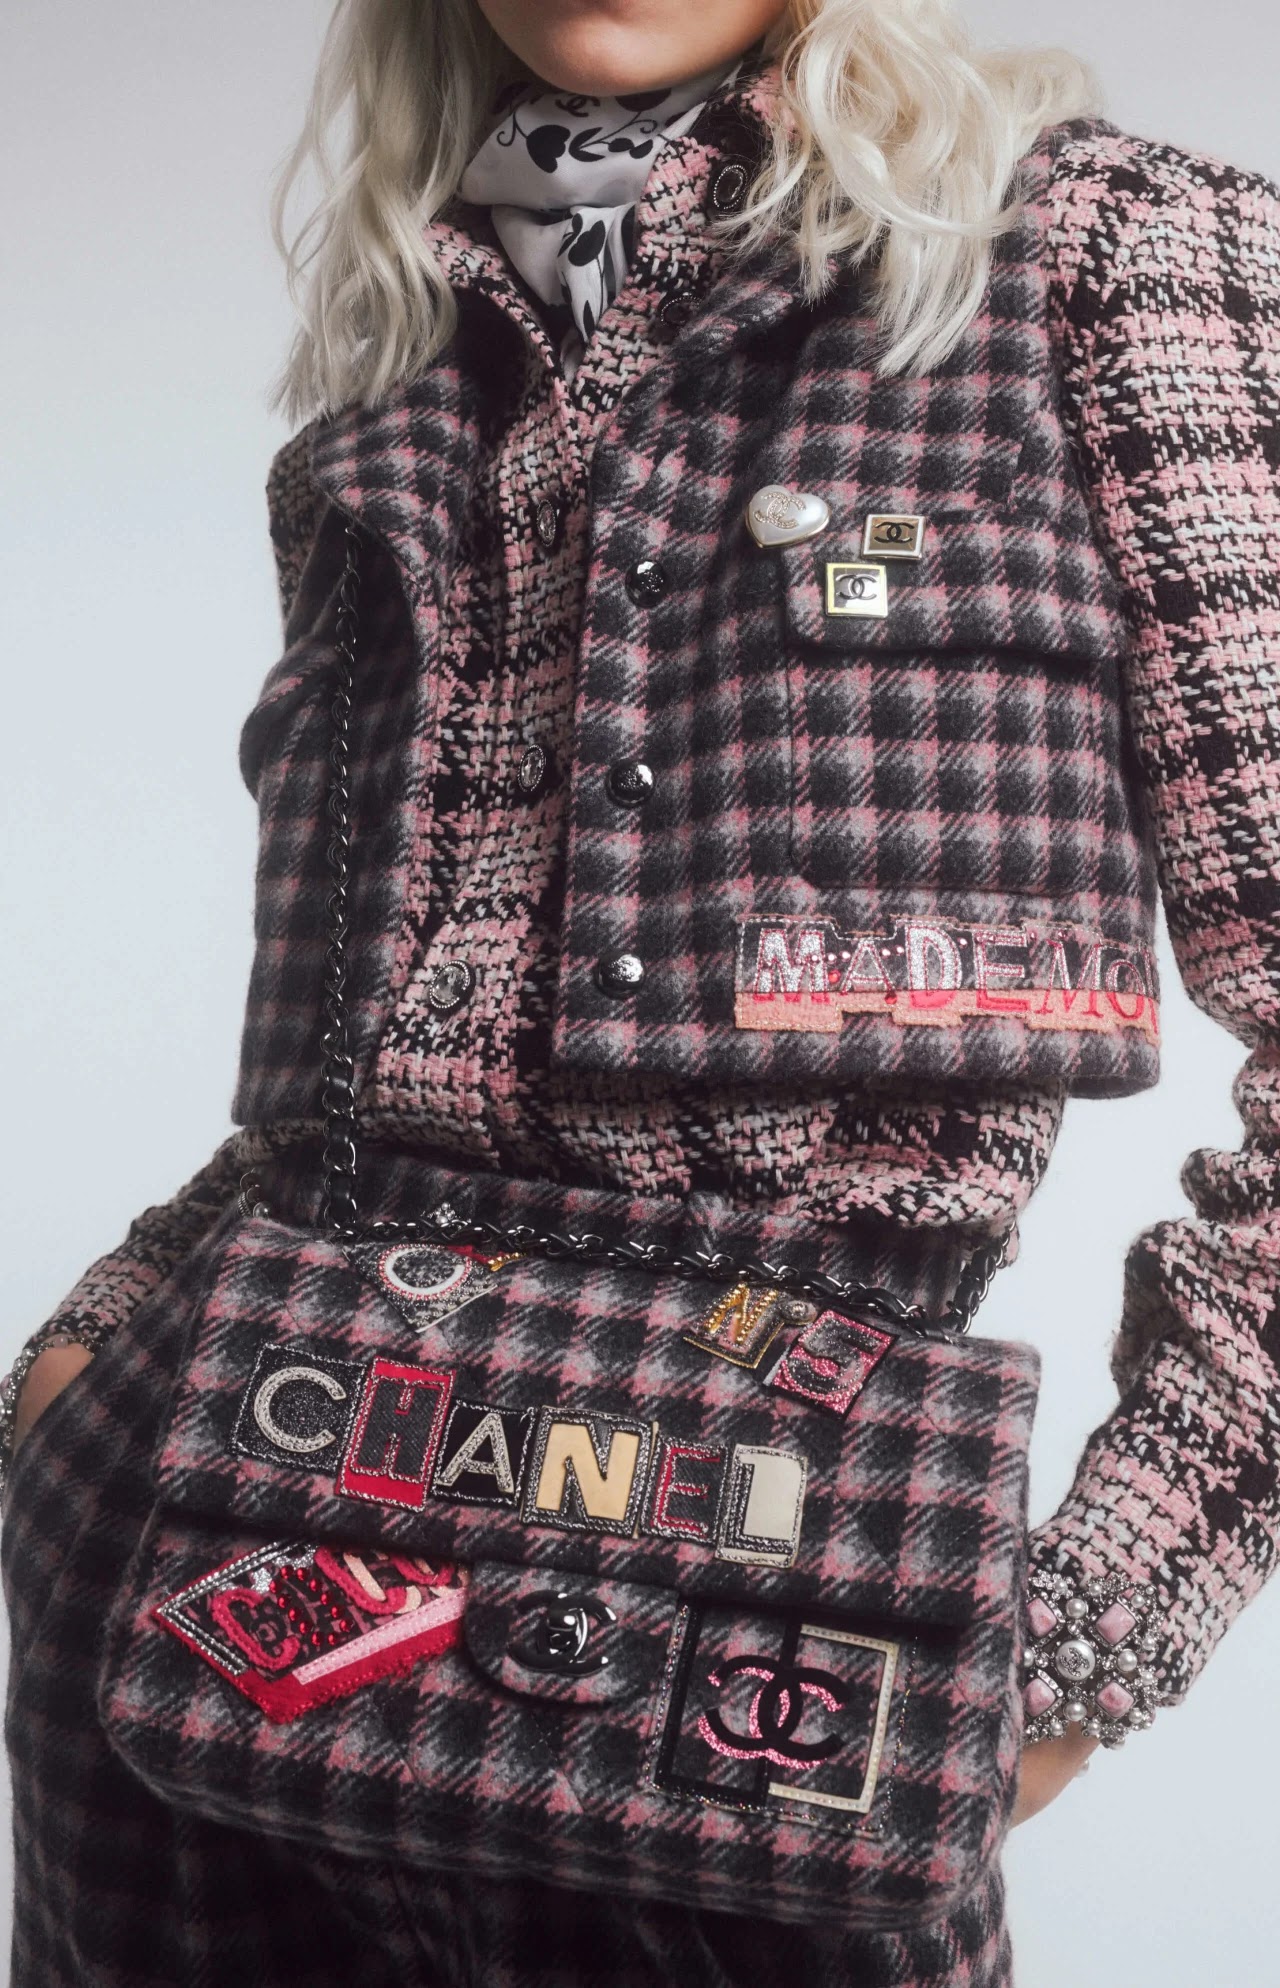 CHANEL'S MOST CONTROVERSIAL BAG? Chanel 22 Reveal & Review 